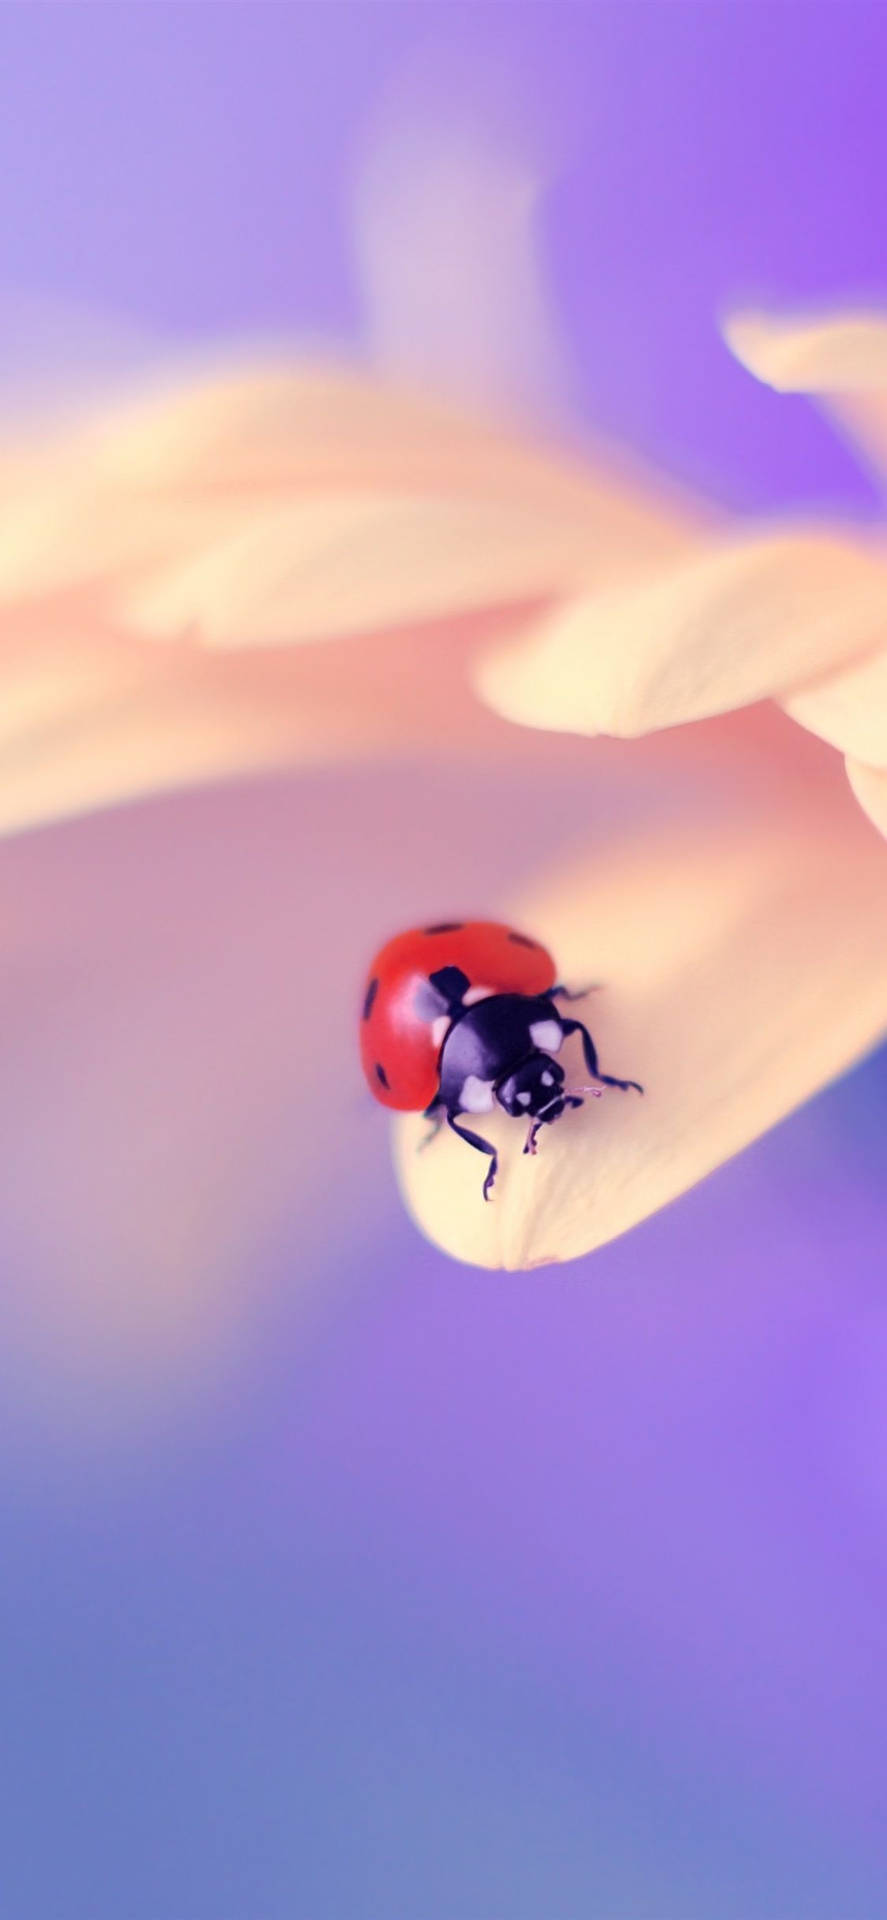 Ladybug Beetle Insect On A Flower